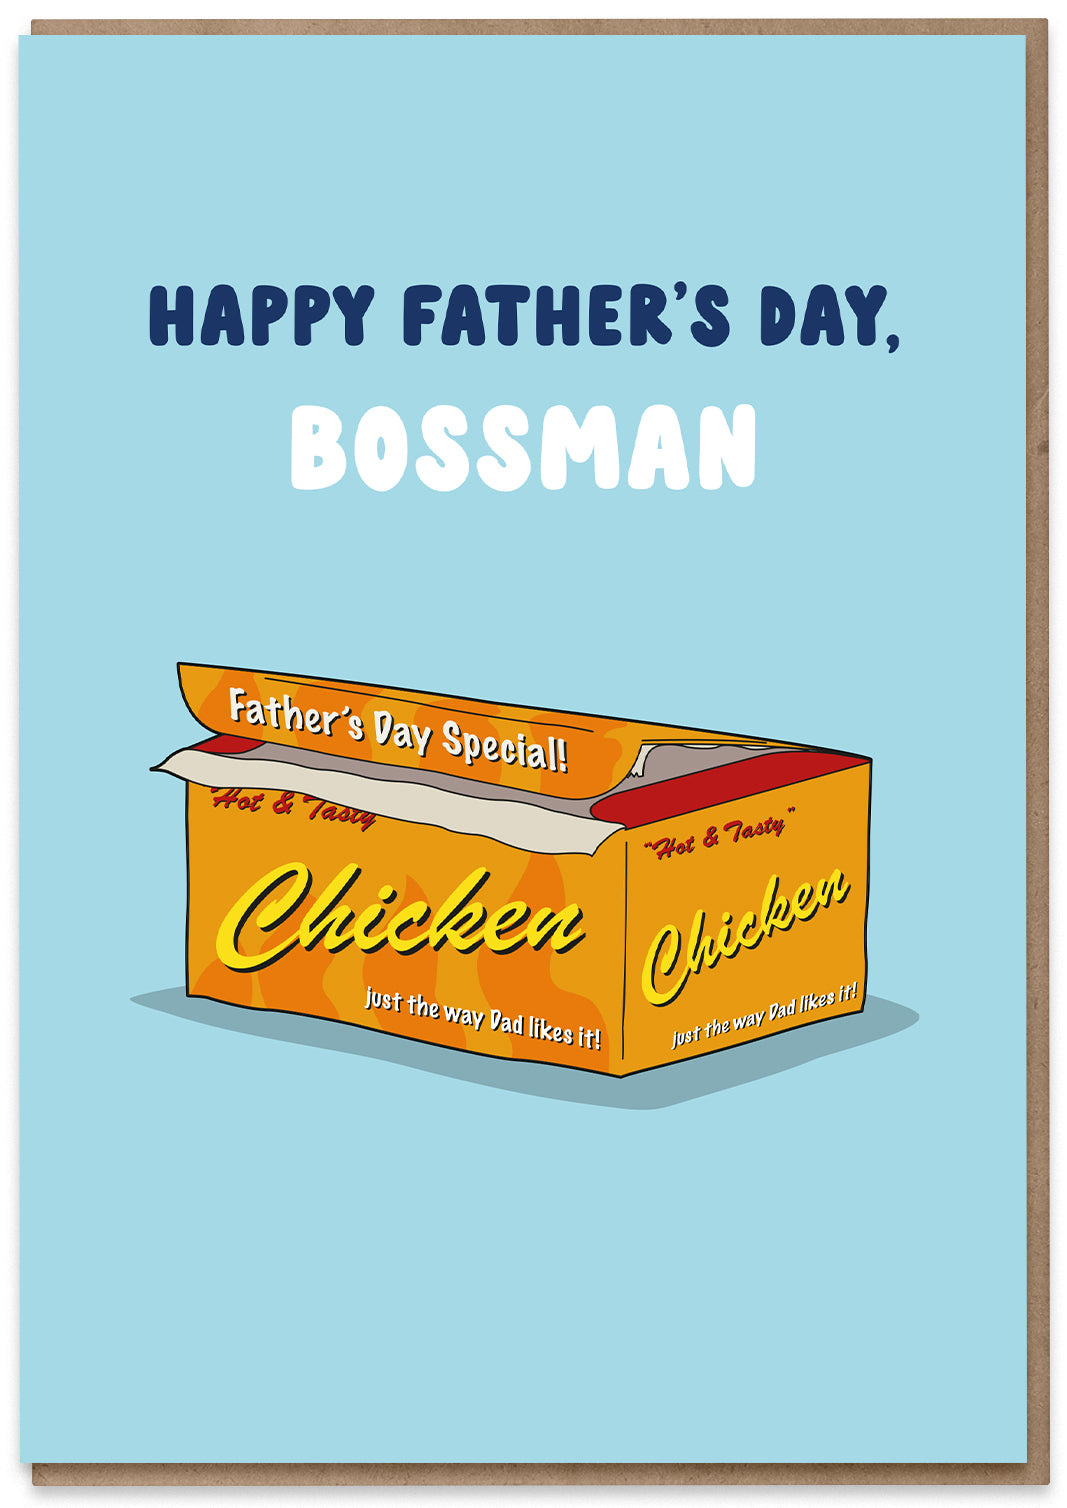 Father's Day Bossman